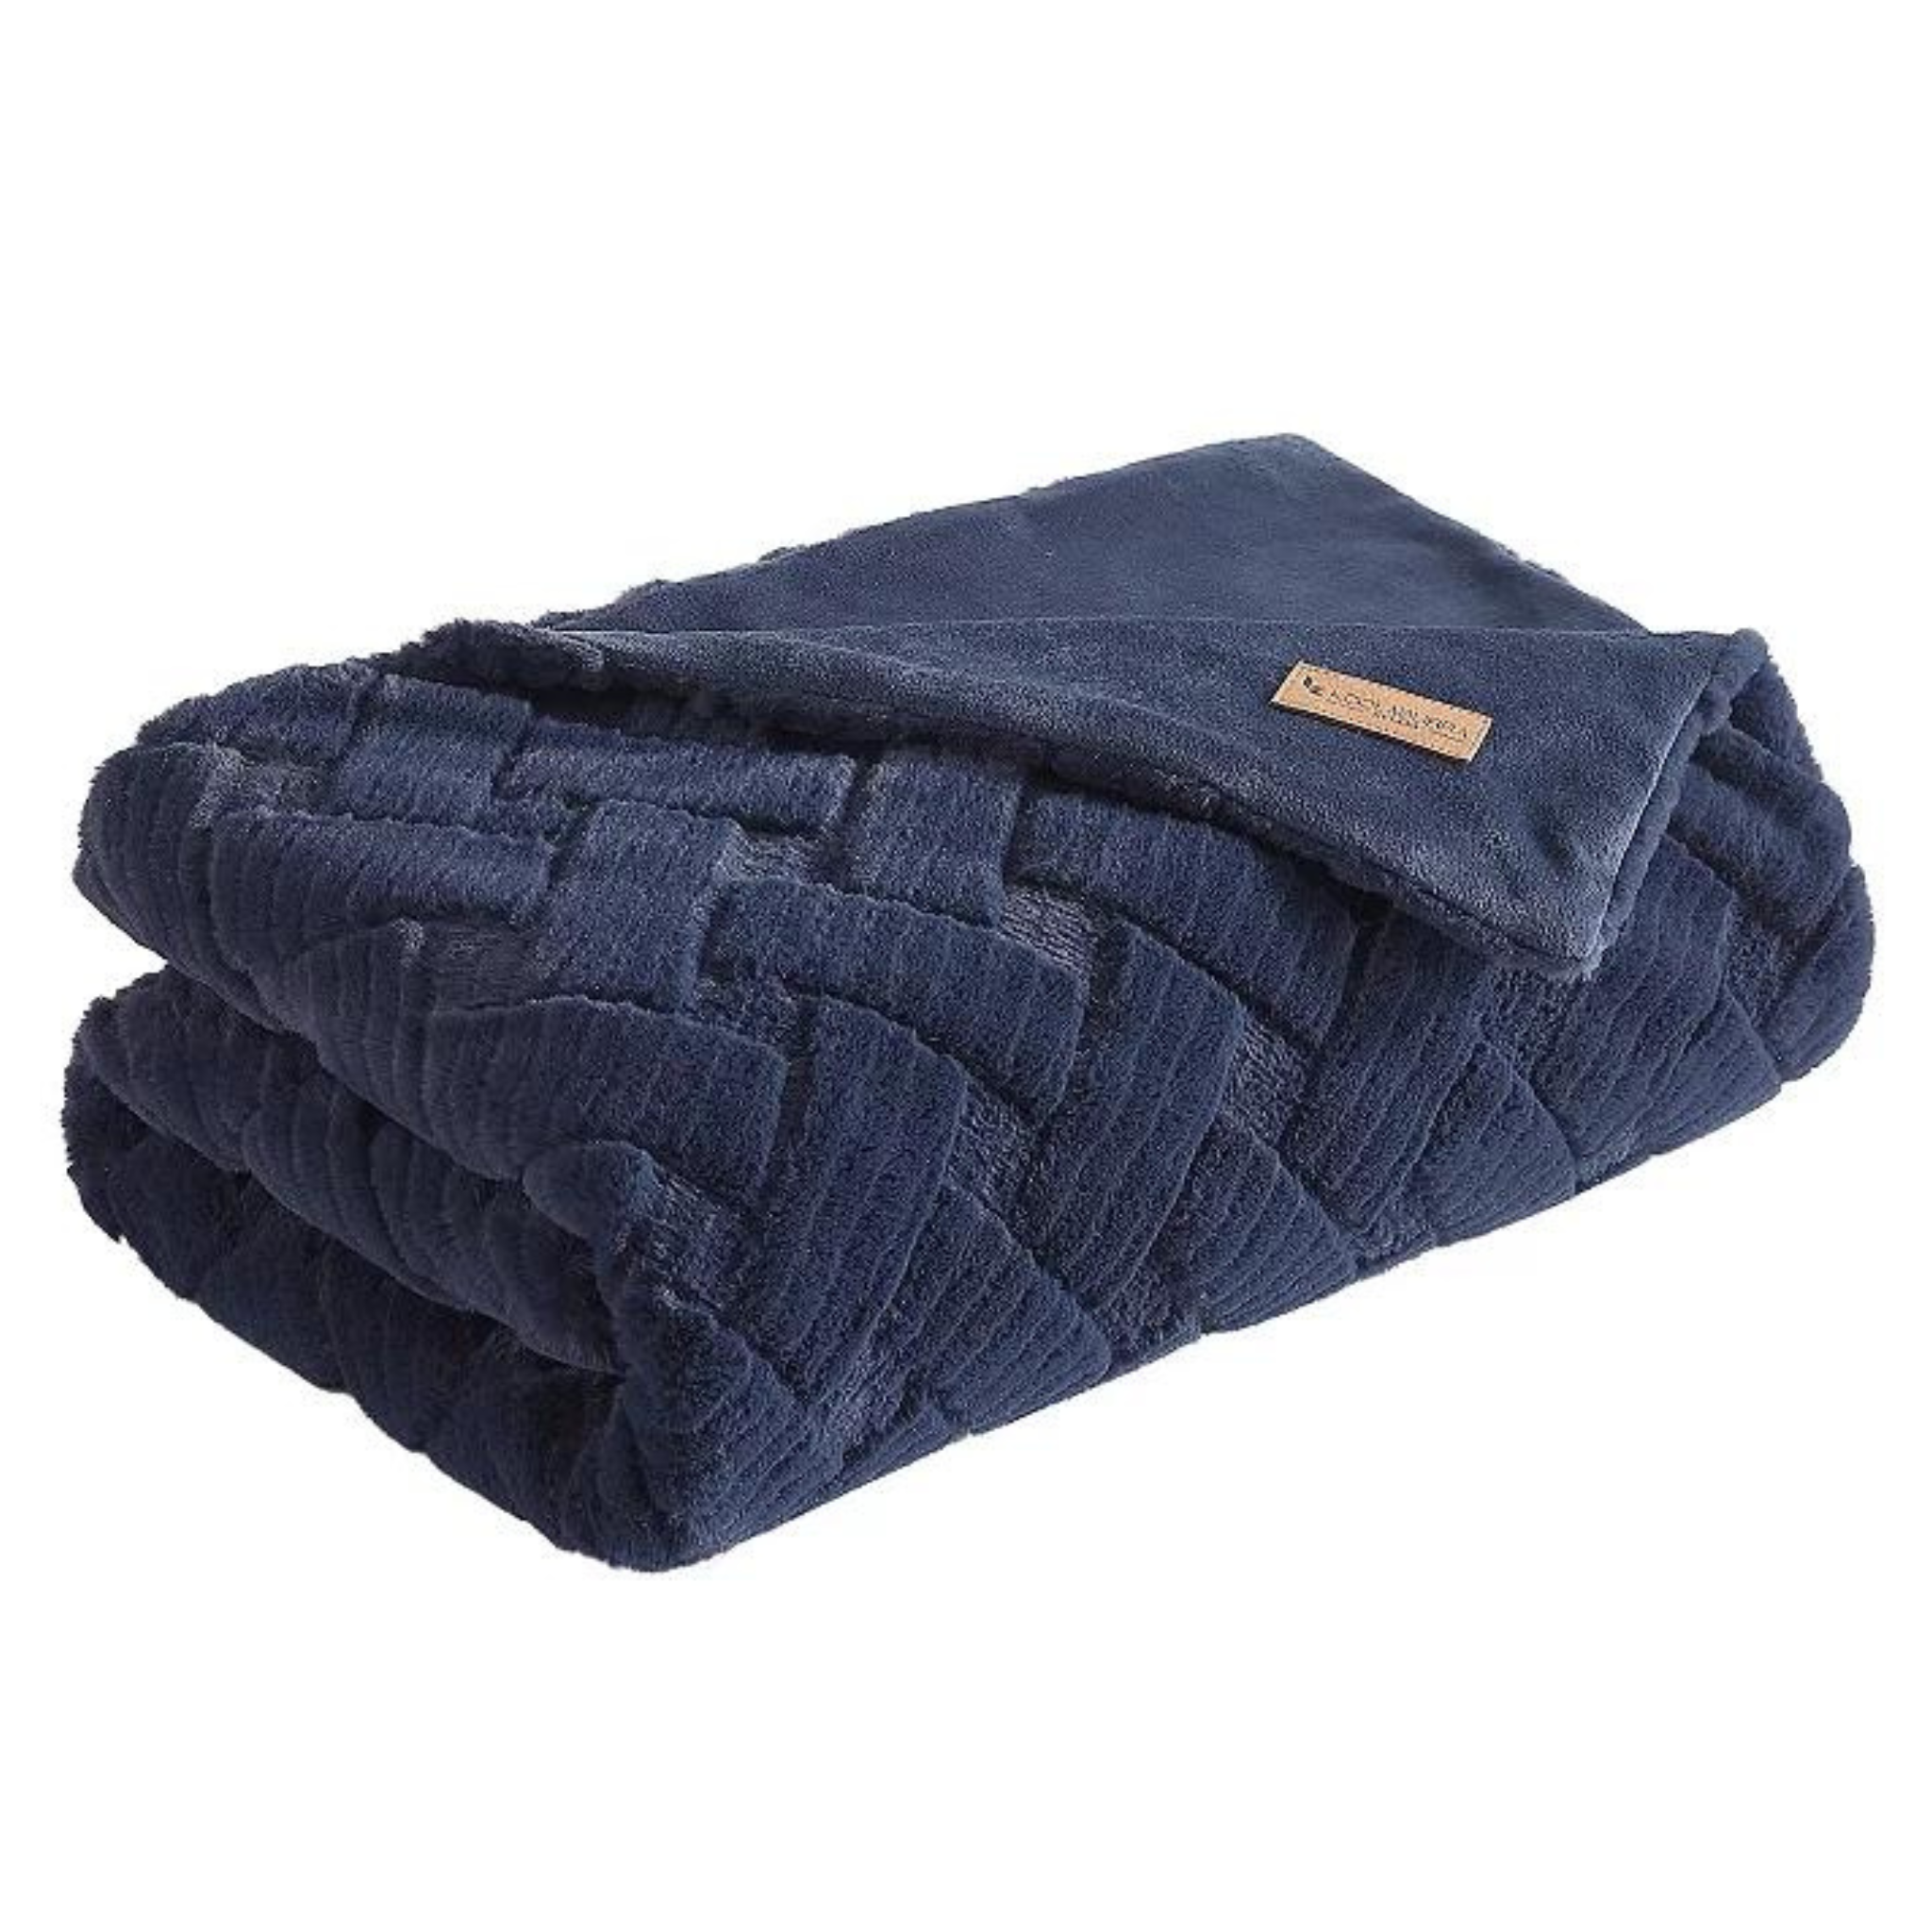 Save Big On Koolaburra by UGG Throws, Boots & More